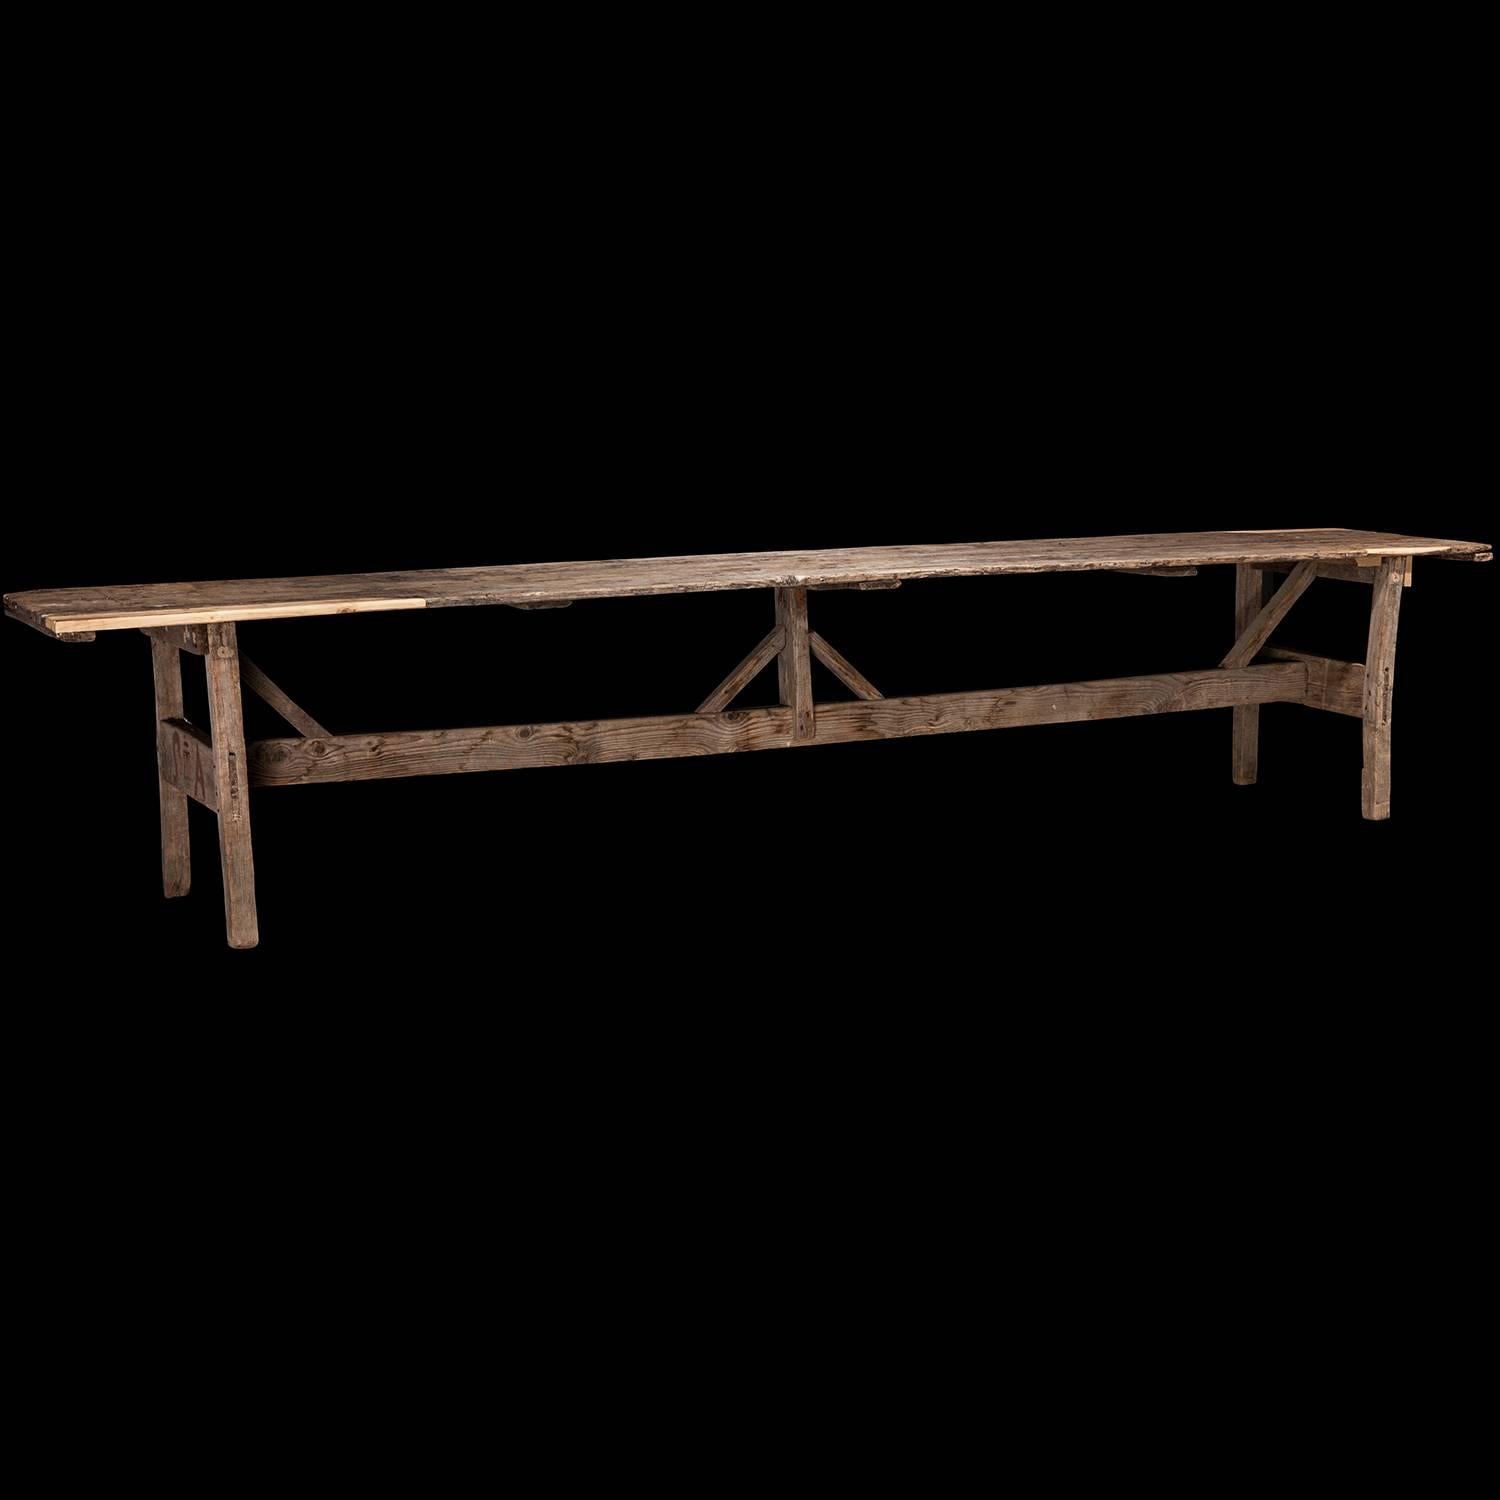 Pine Industrial Work Table, circa 1880.

Simple pine trestle table.